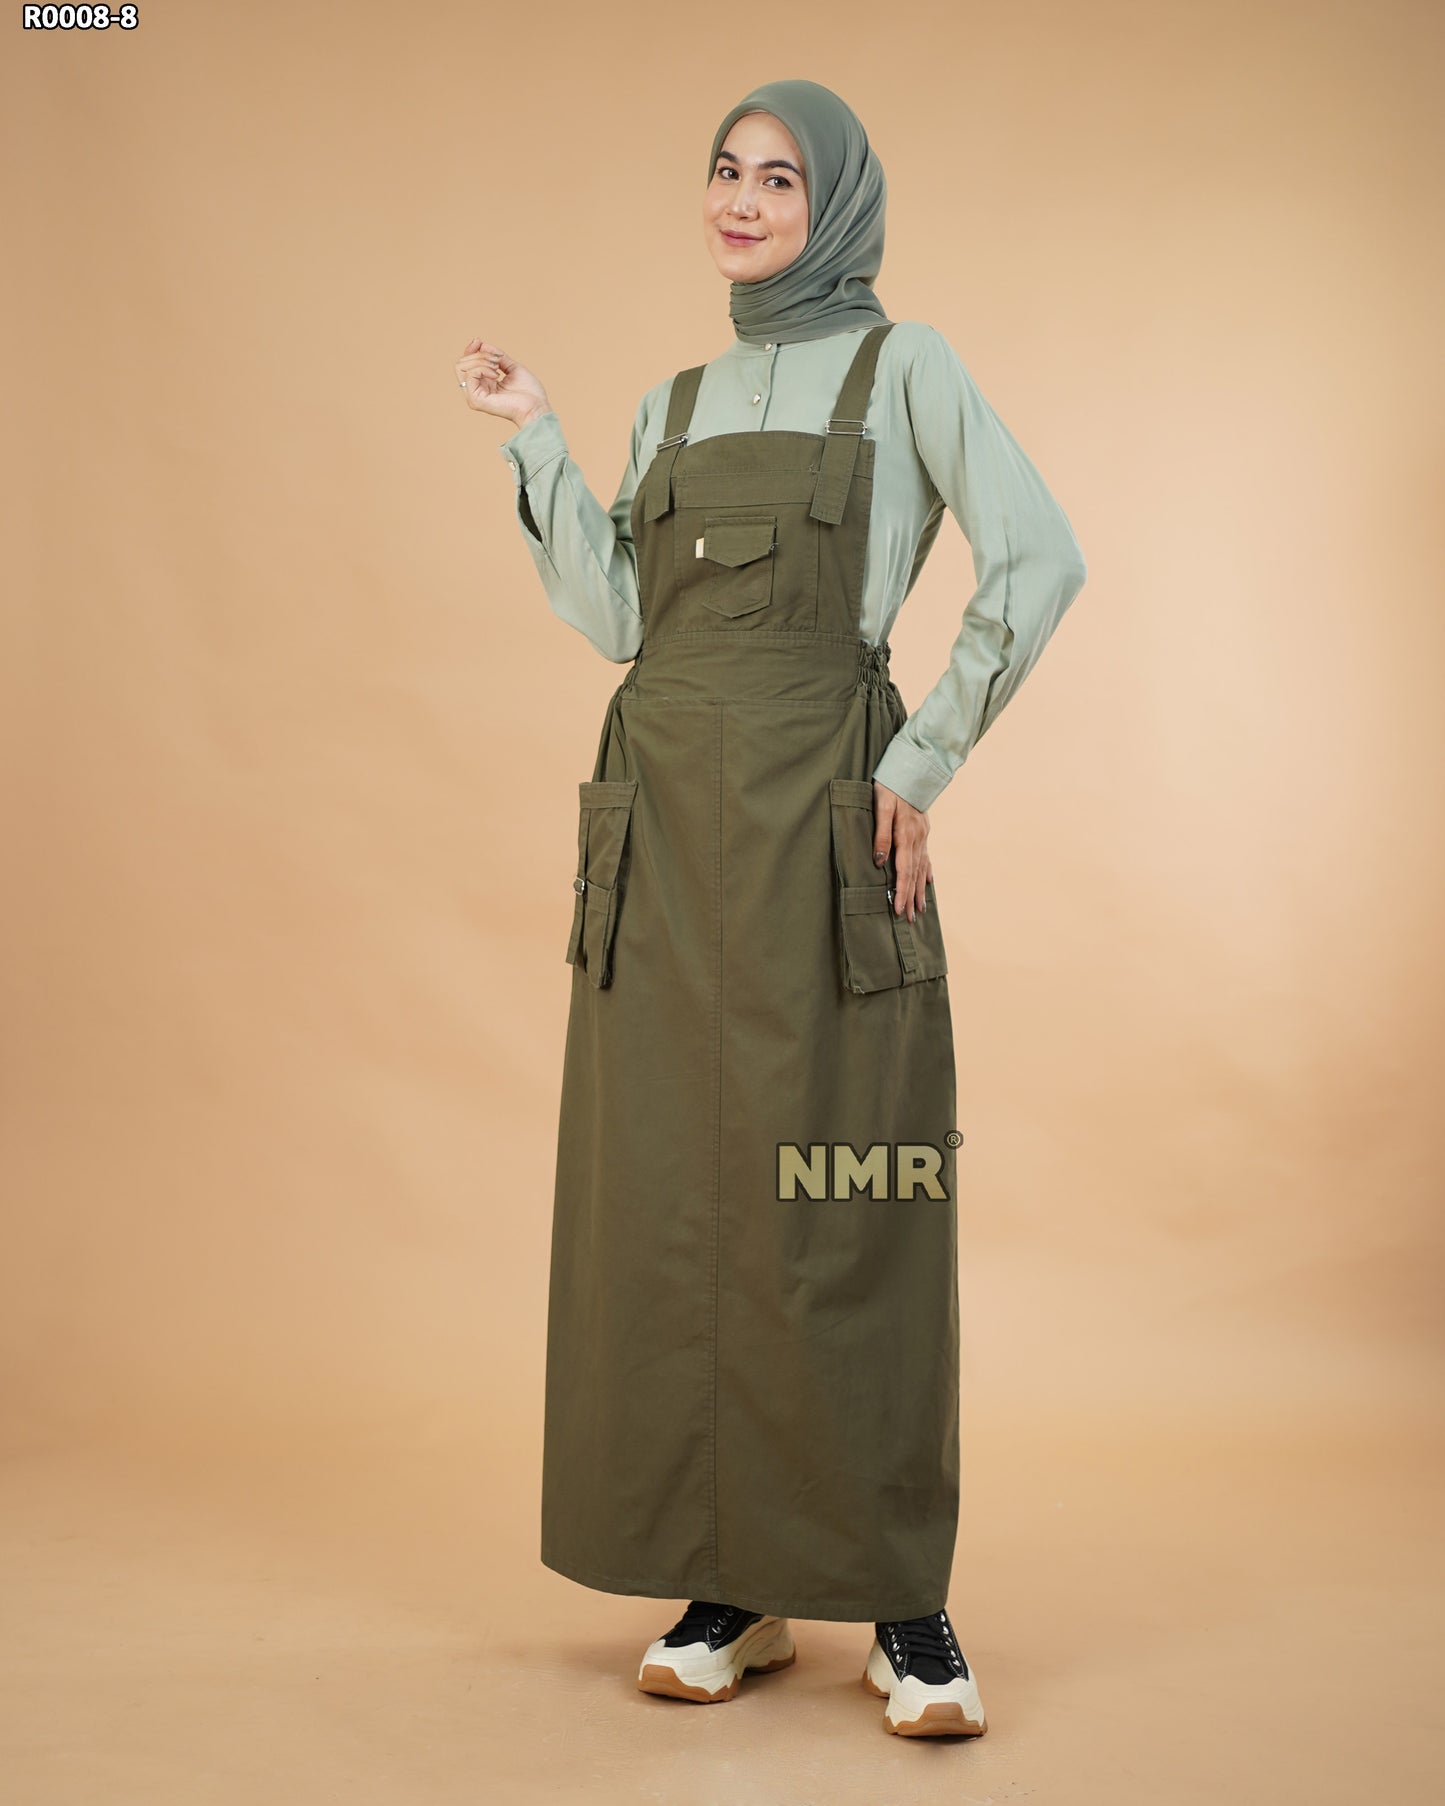 NMR Gamis Jumpsuit Overall Baby Canvas Vol R0008-8